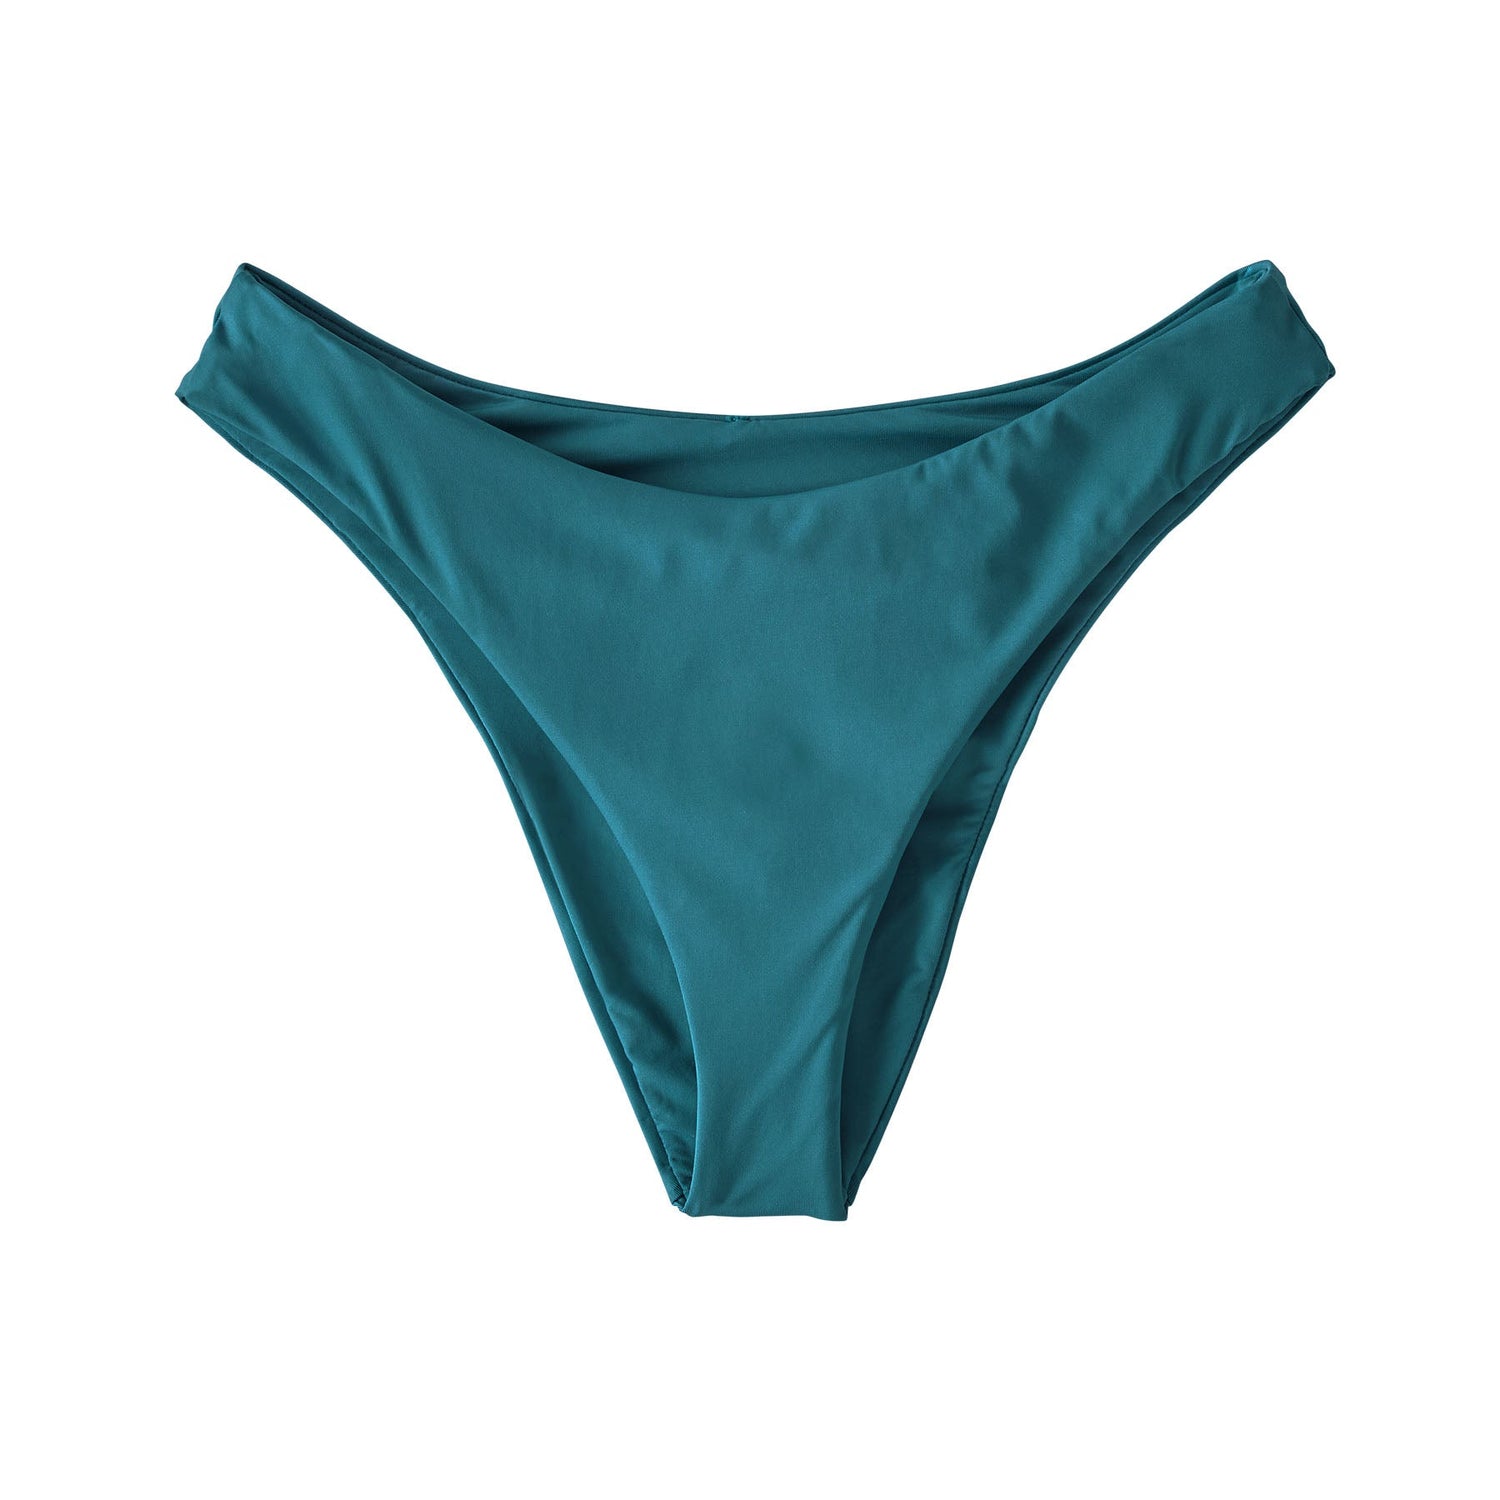 Patagonia W's Upswell Bottoms - Recycled Nylon Abalone Blue Swimwear